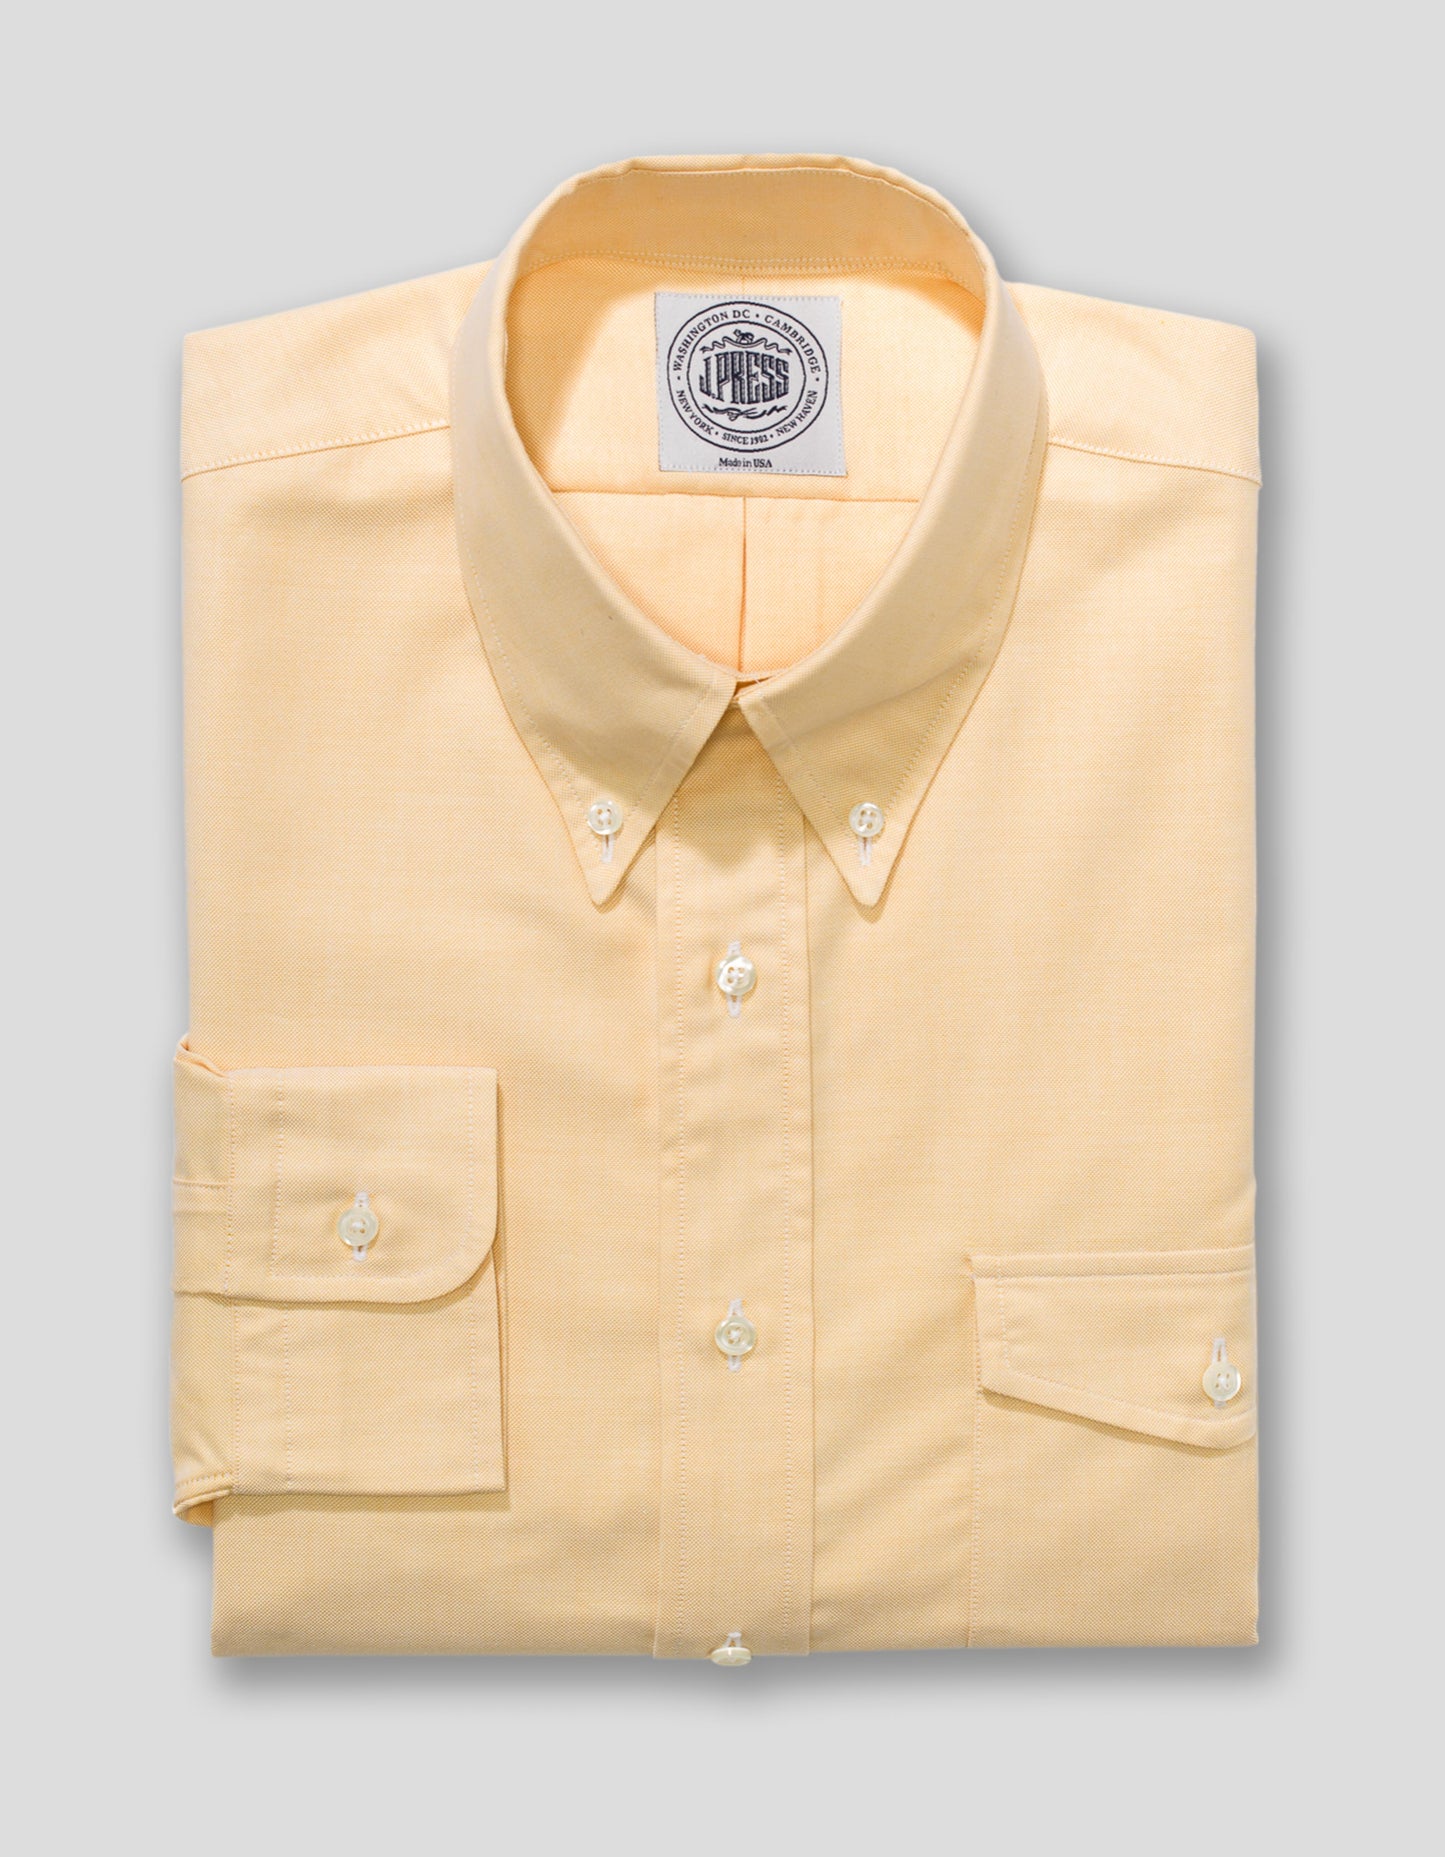 YELLOW OXFORD WITH FLAP POCKET DRESS SHIRT